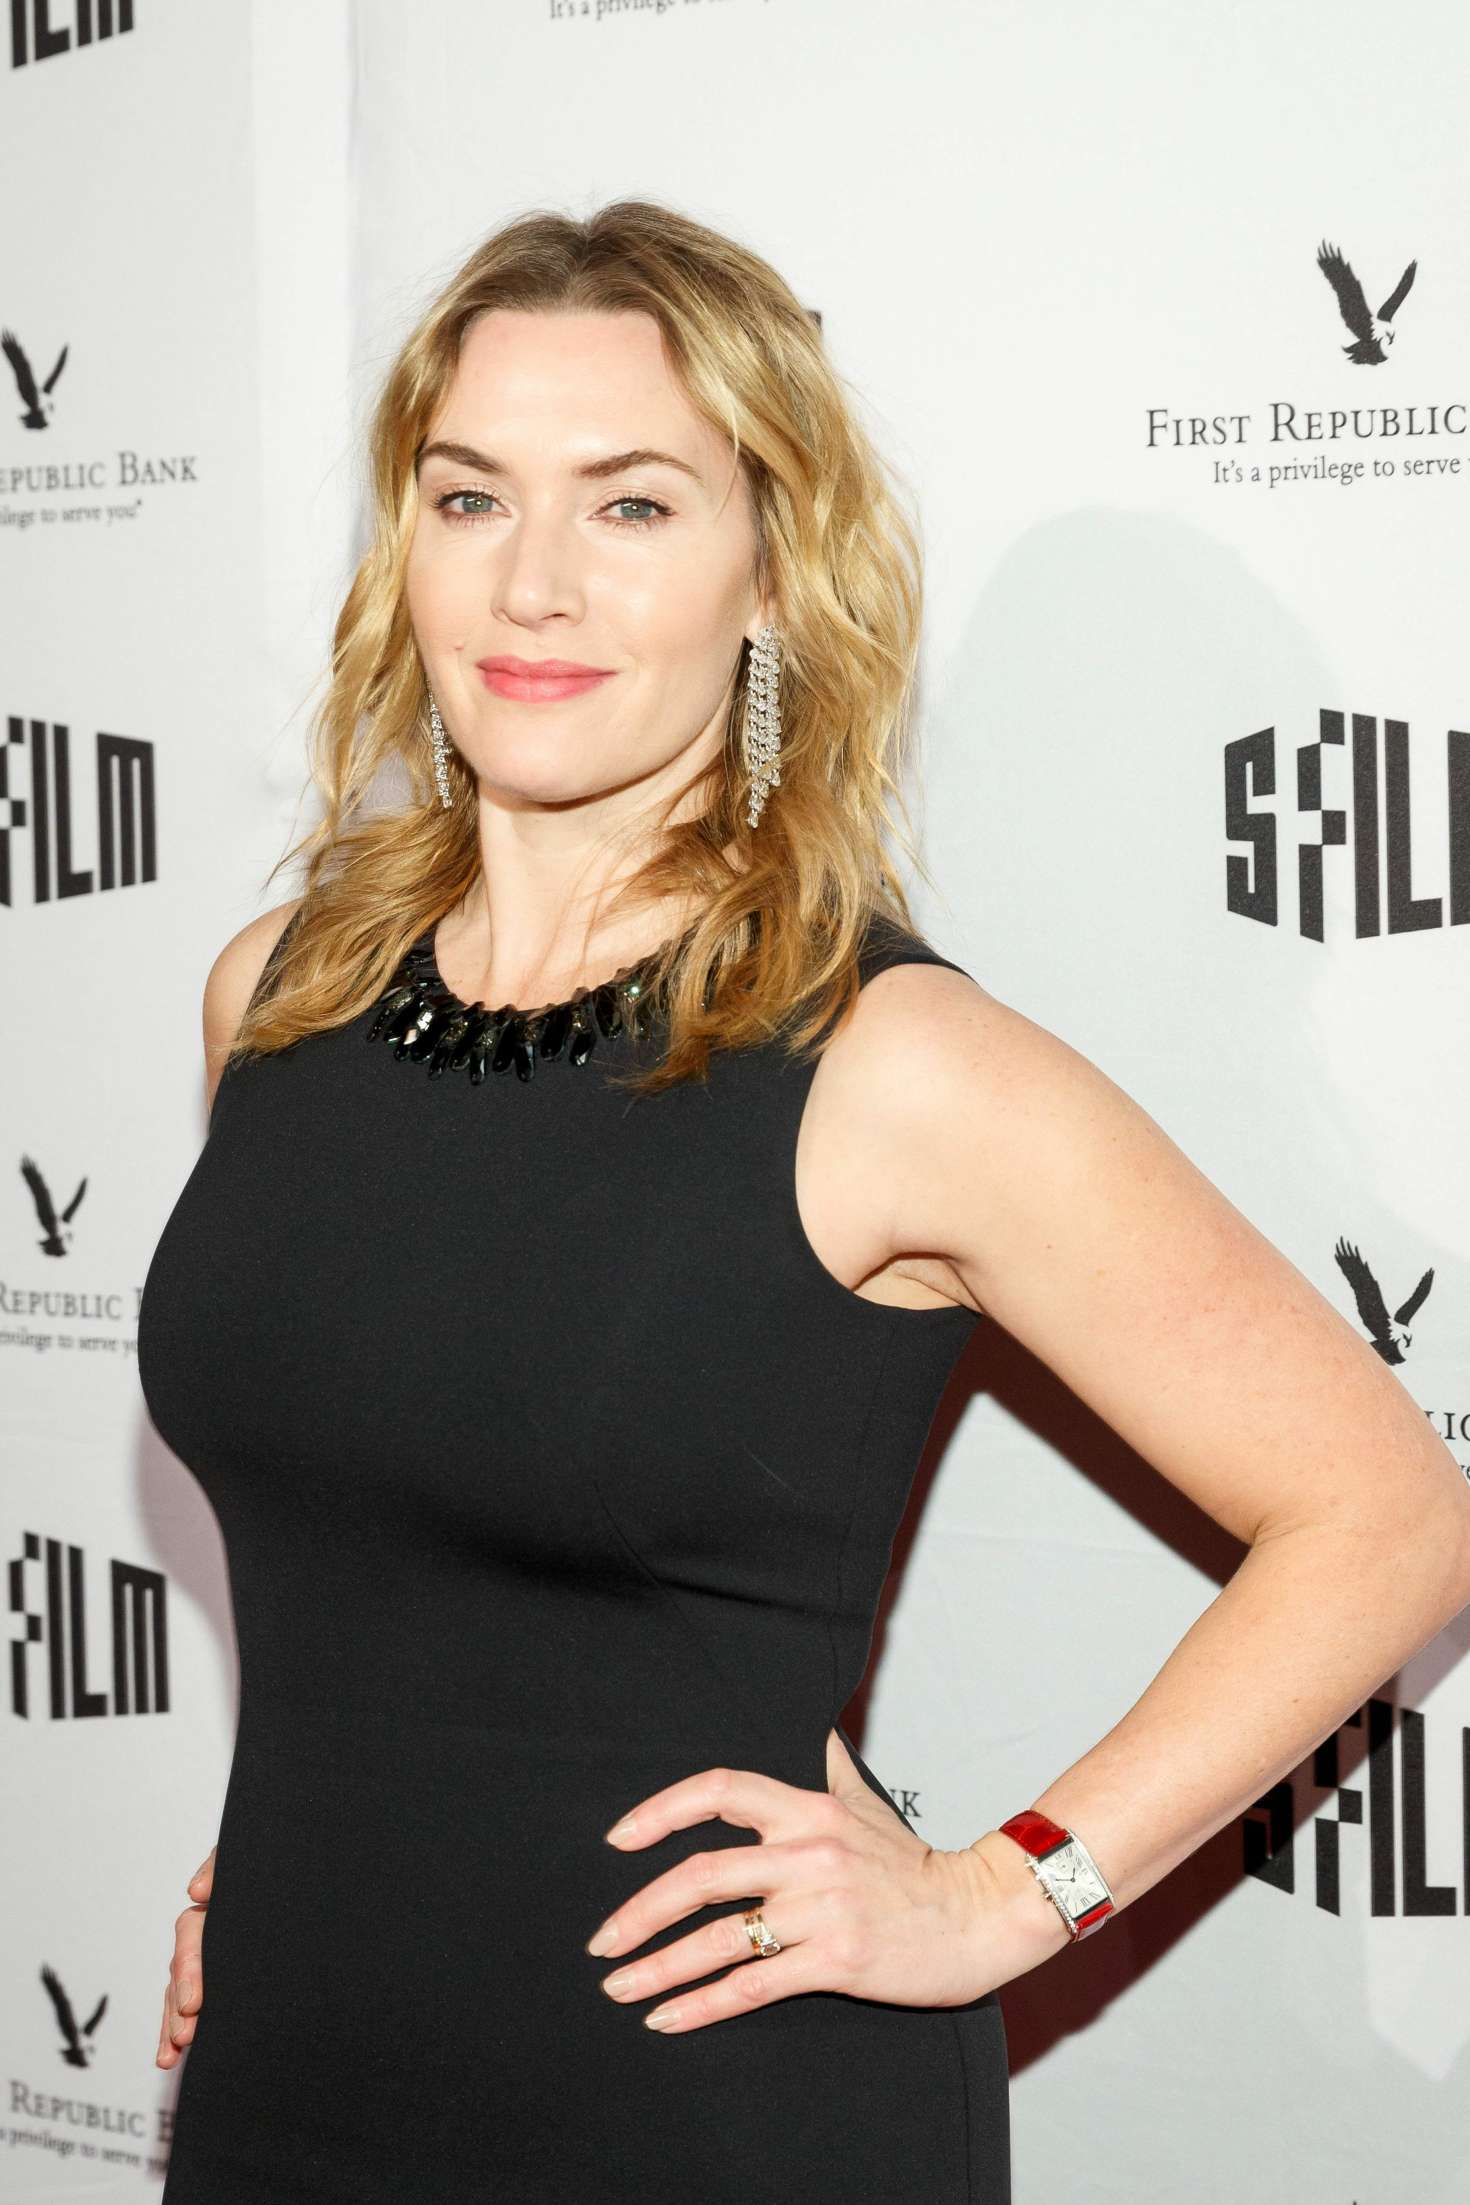 Kate Winslet Sffilms 60th Anniversary Awards Night In San Francisco Gotceleb